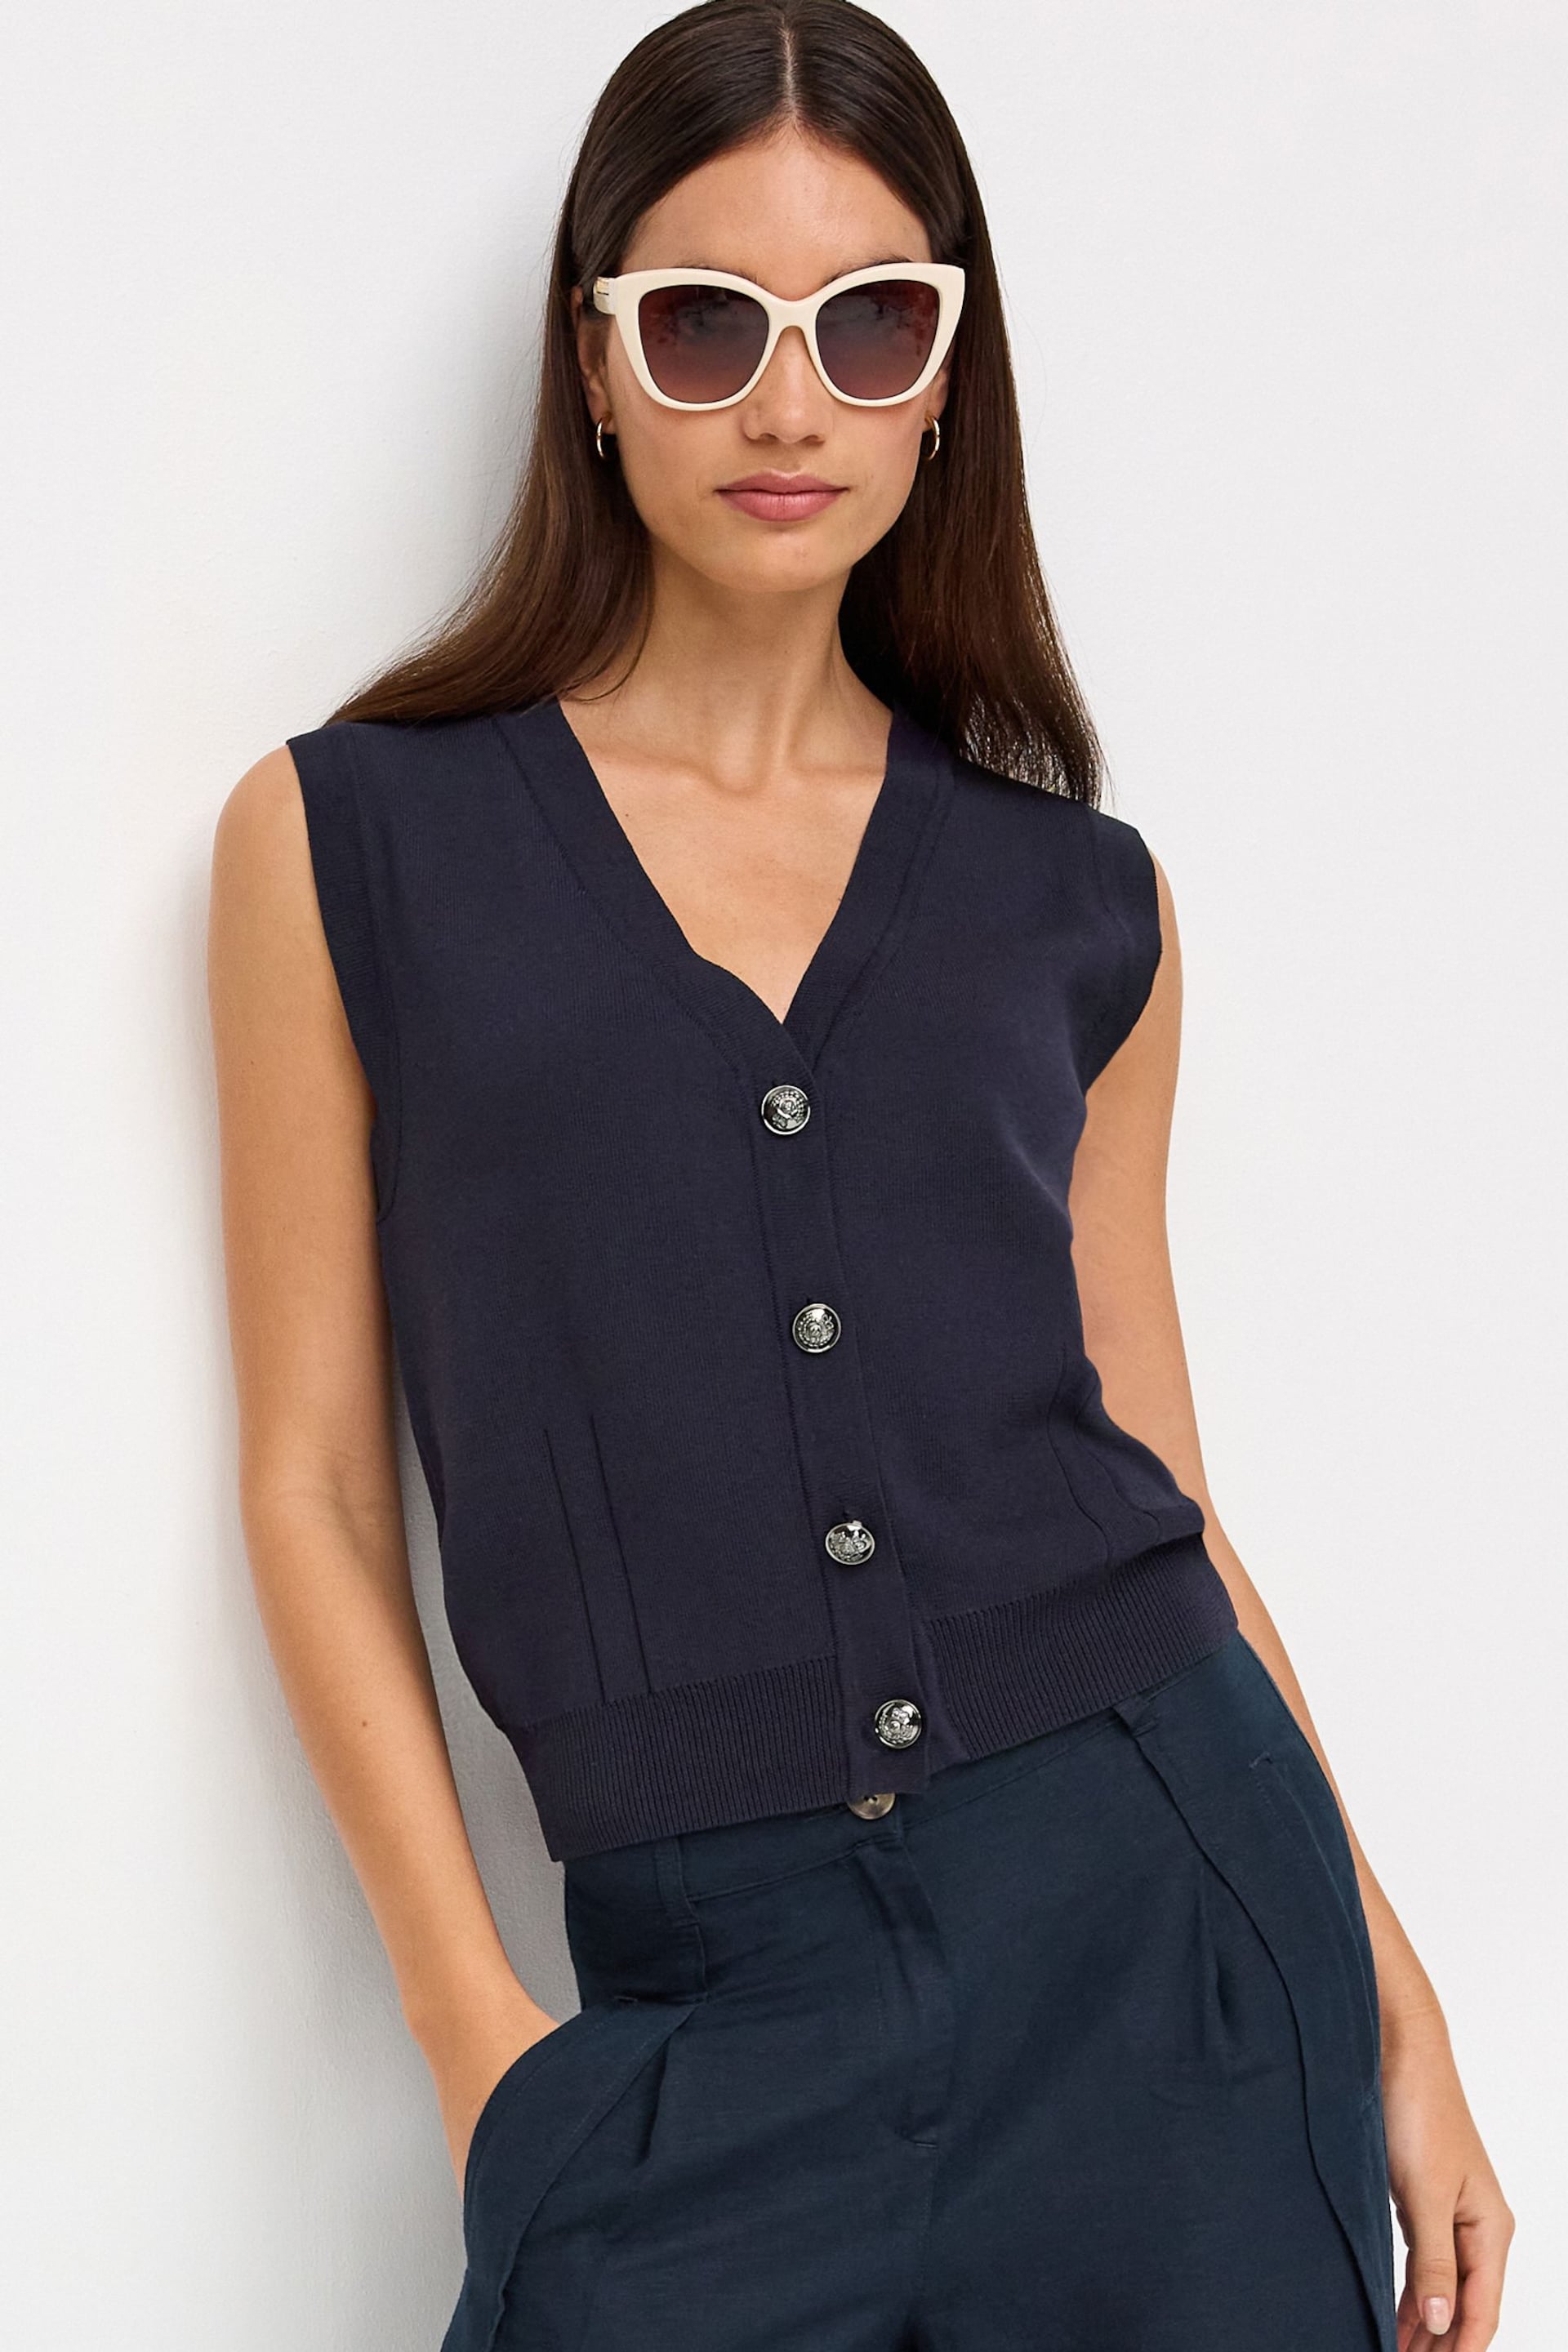 Navy Blue Button Up Waistcoat - Image 1 of 6